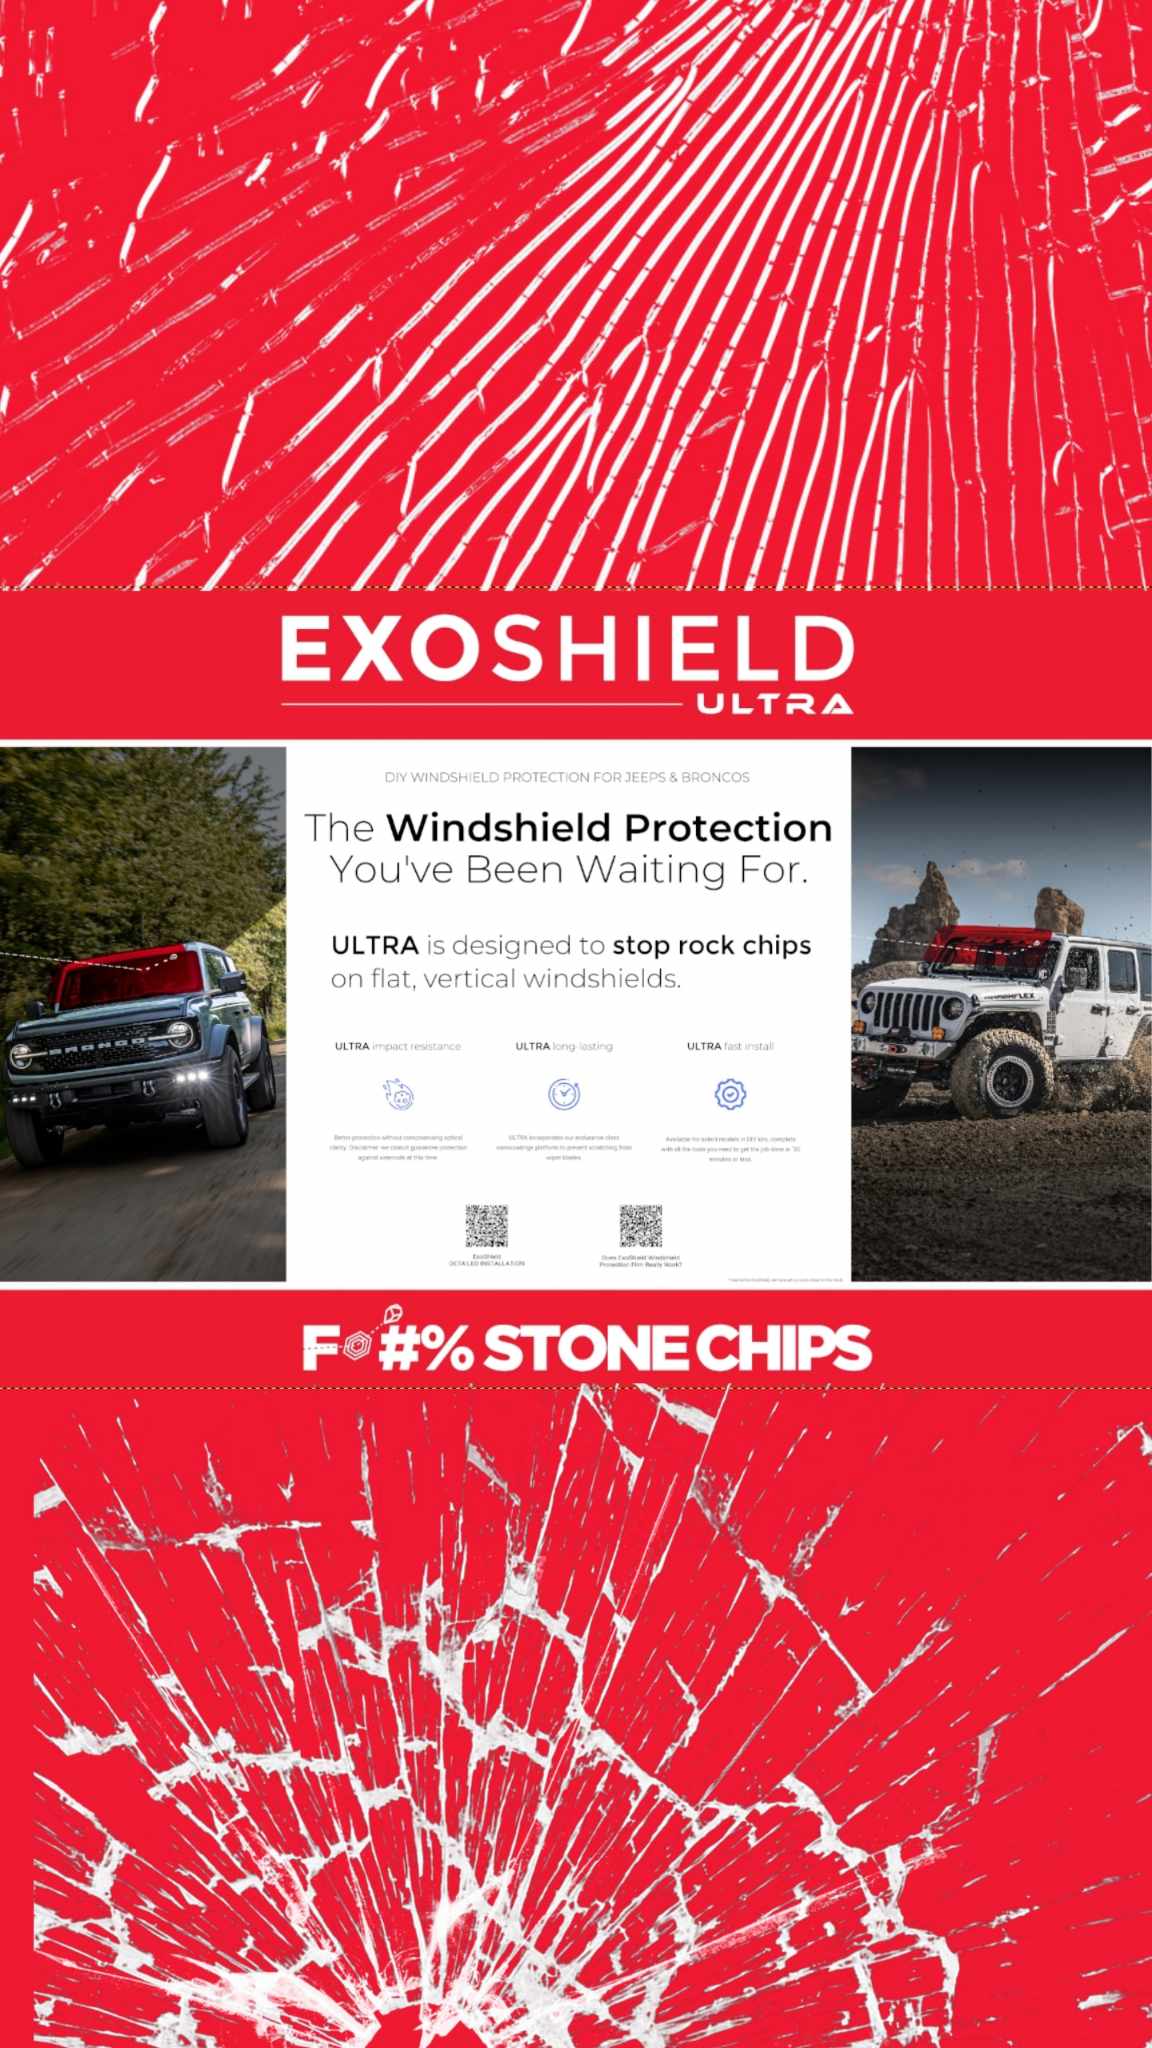 Jeep Gladiator Protect your windshield against road hazards with ExoShield Windshield Protection 421268891_1098729087983985_5377836360048958838_n